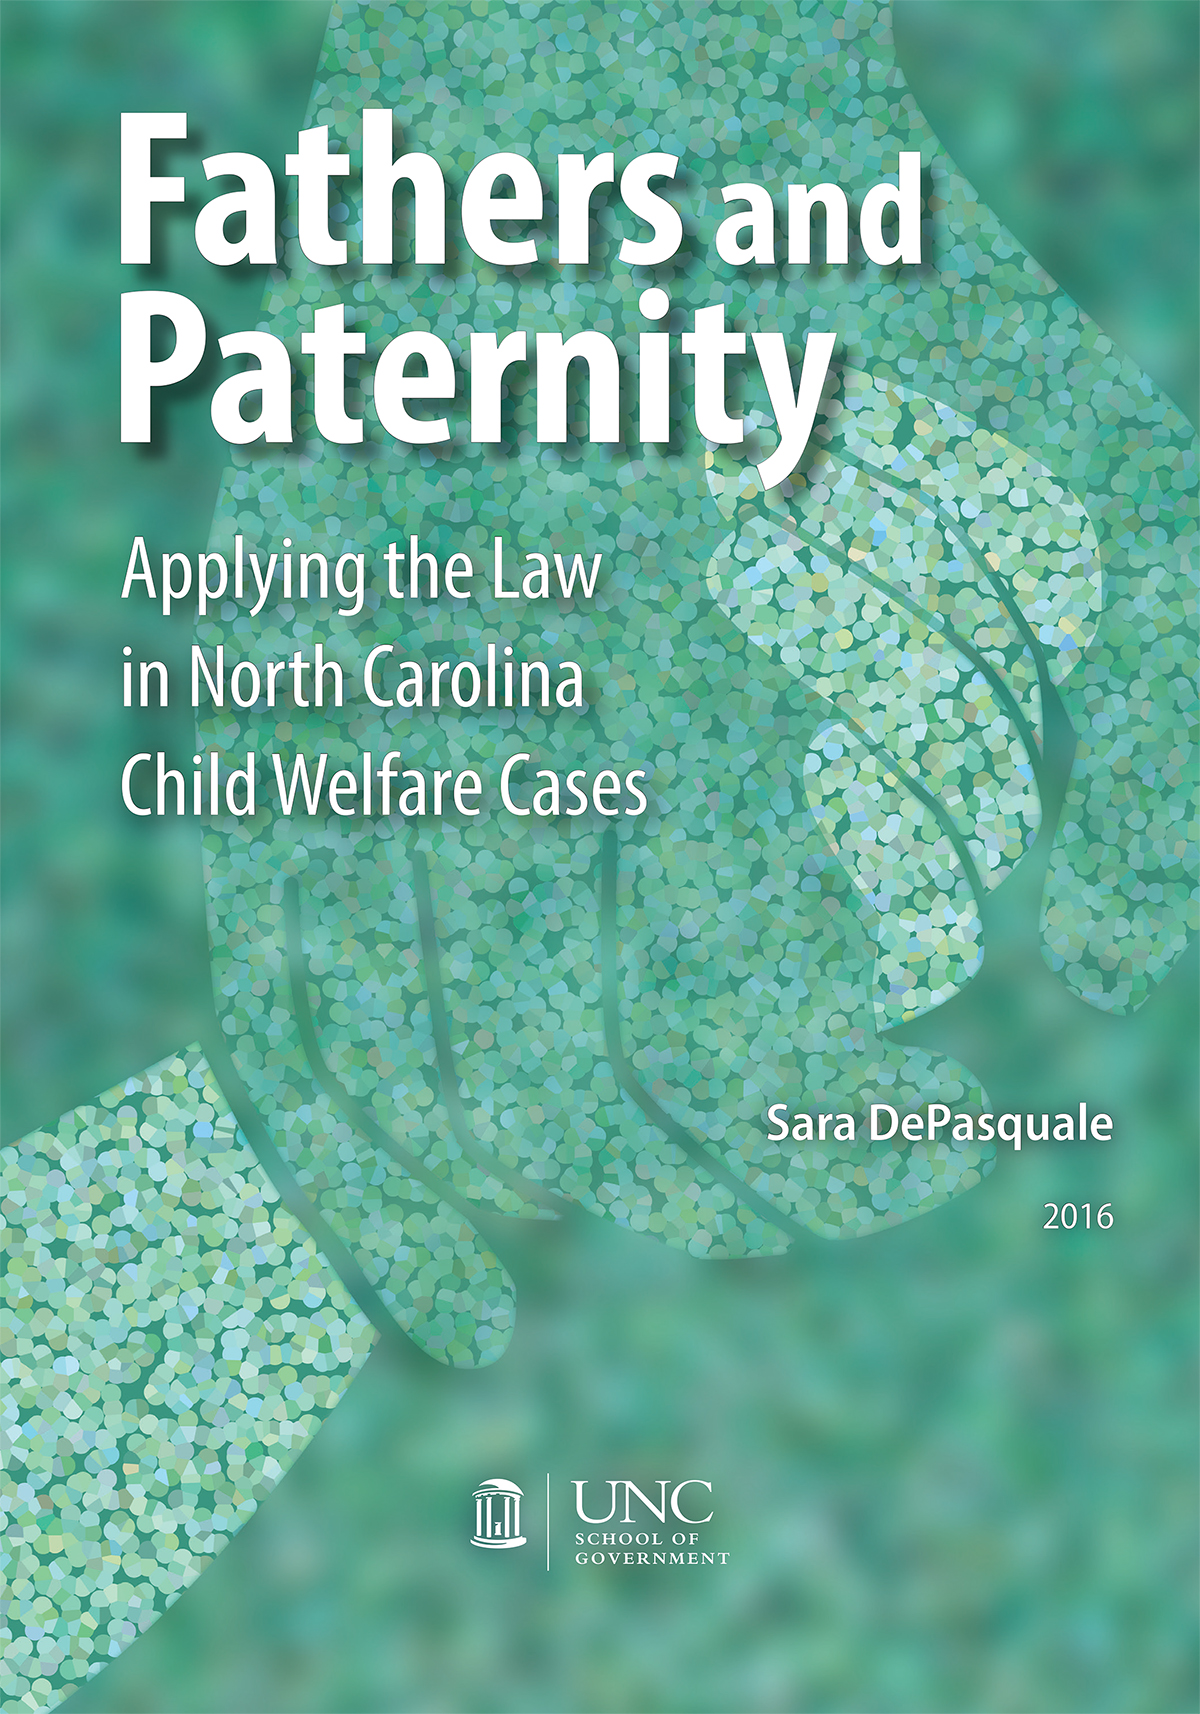 Fathers and Paternity: Applying the Law in North Carolina Child Welfare Cases